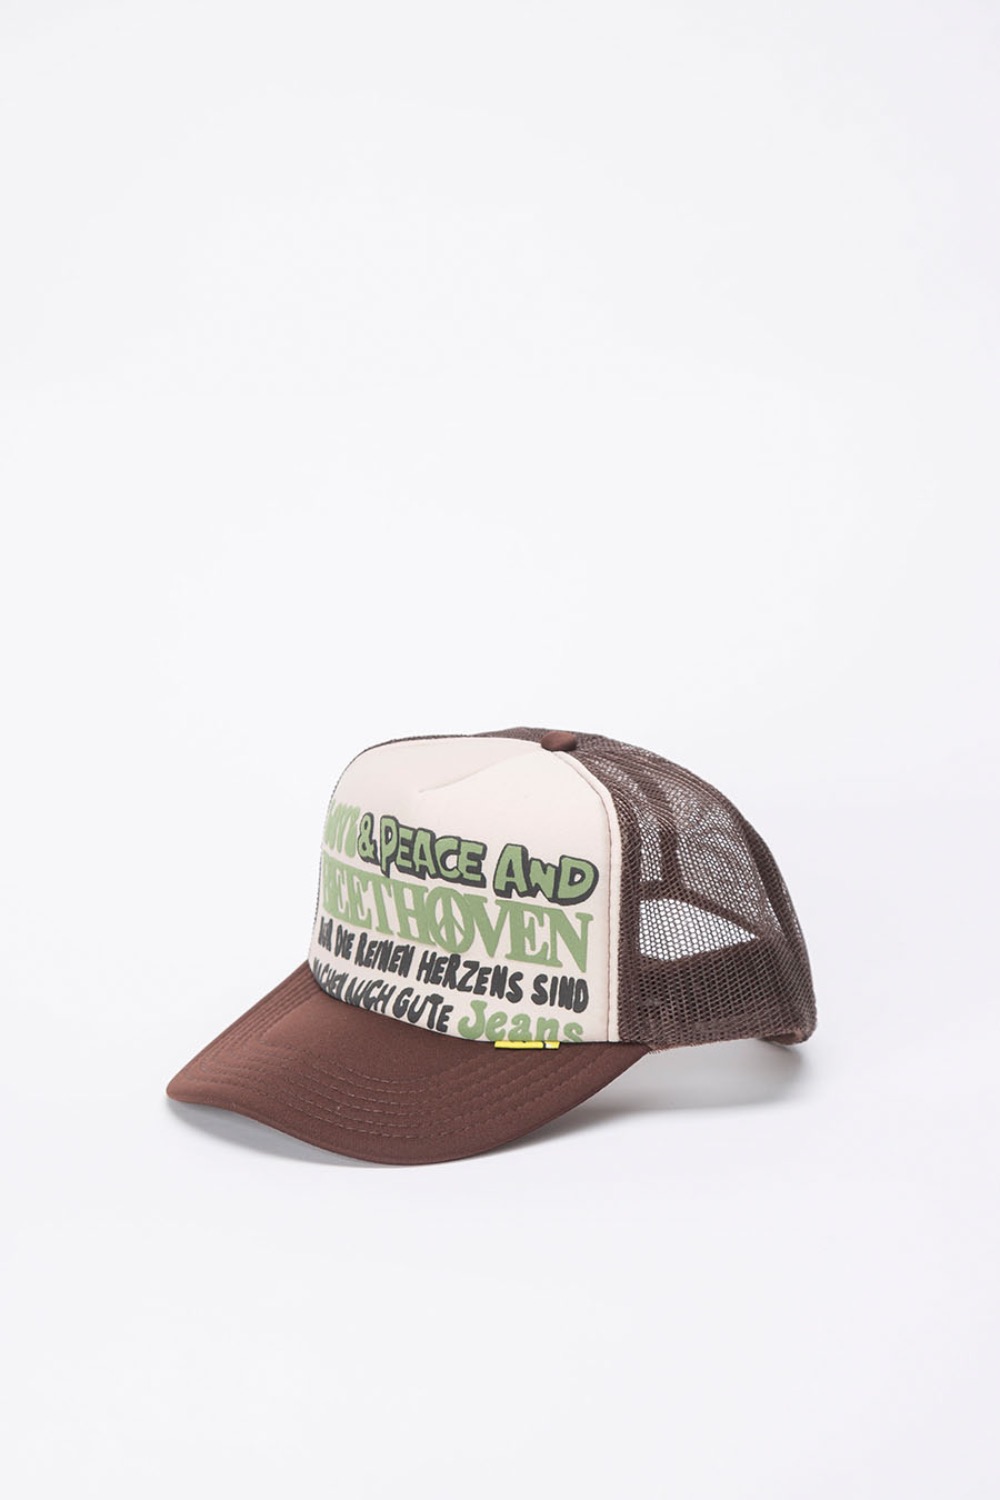 (23FW) LOVE&amp;PEACE AND BEETHOVEN TRUCK CAP ECRU/BROWN